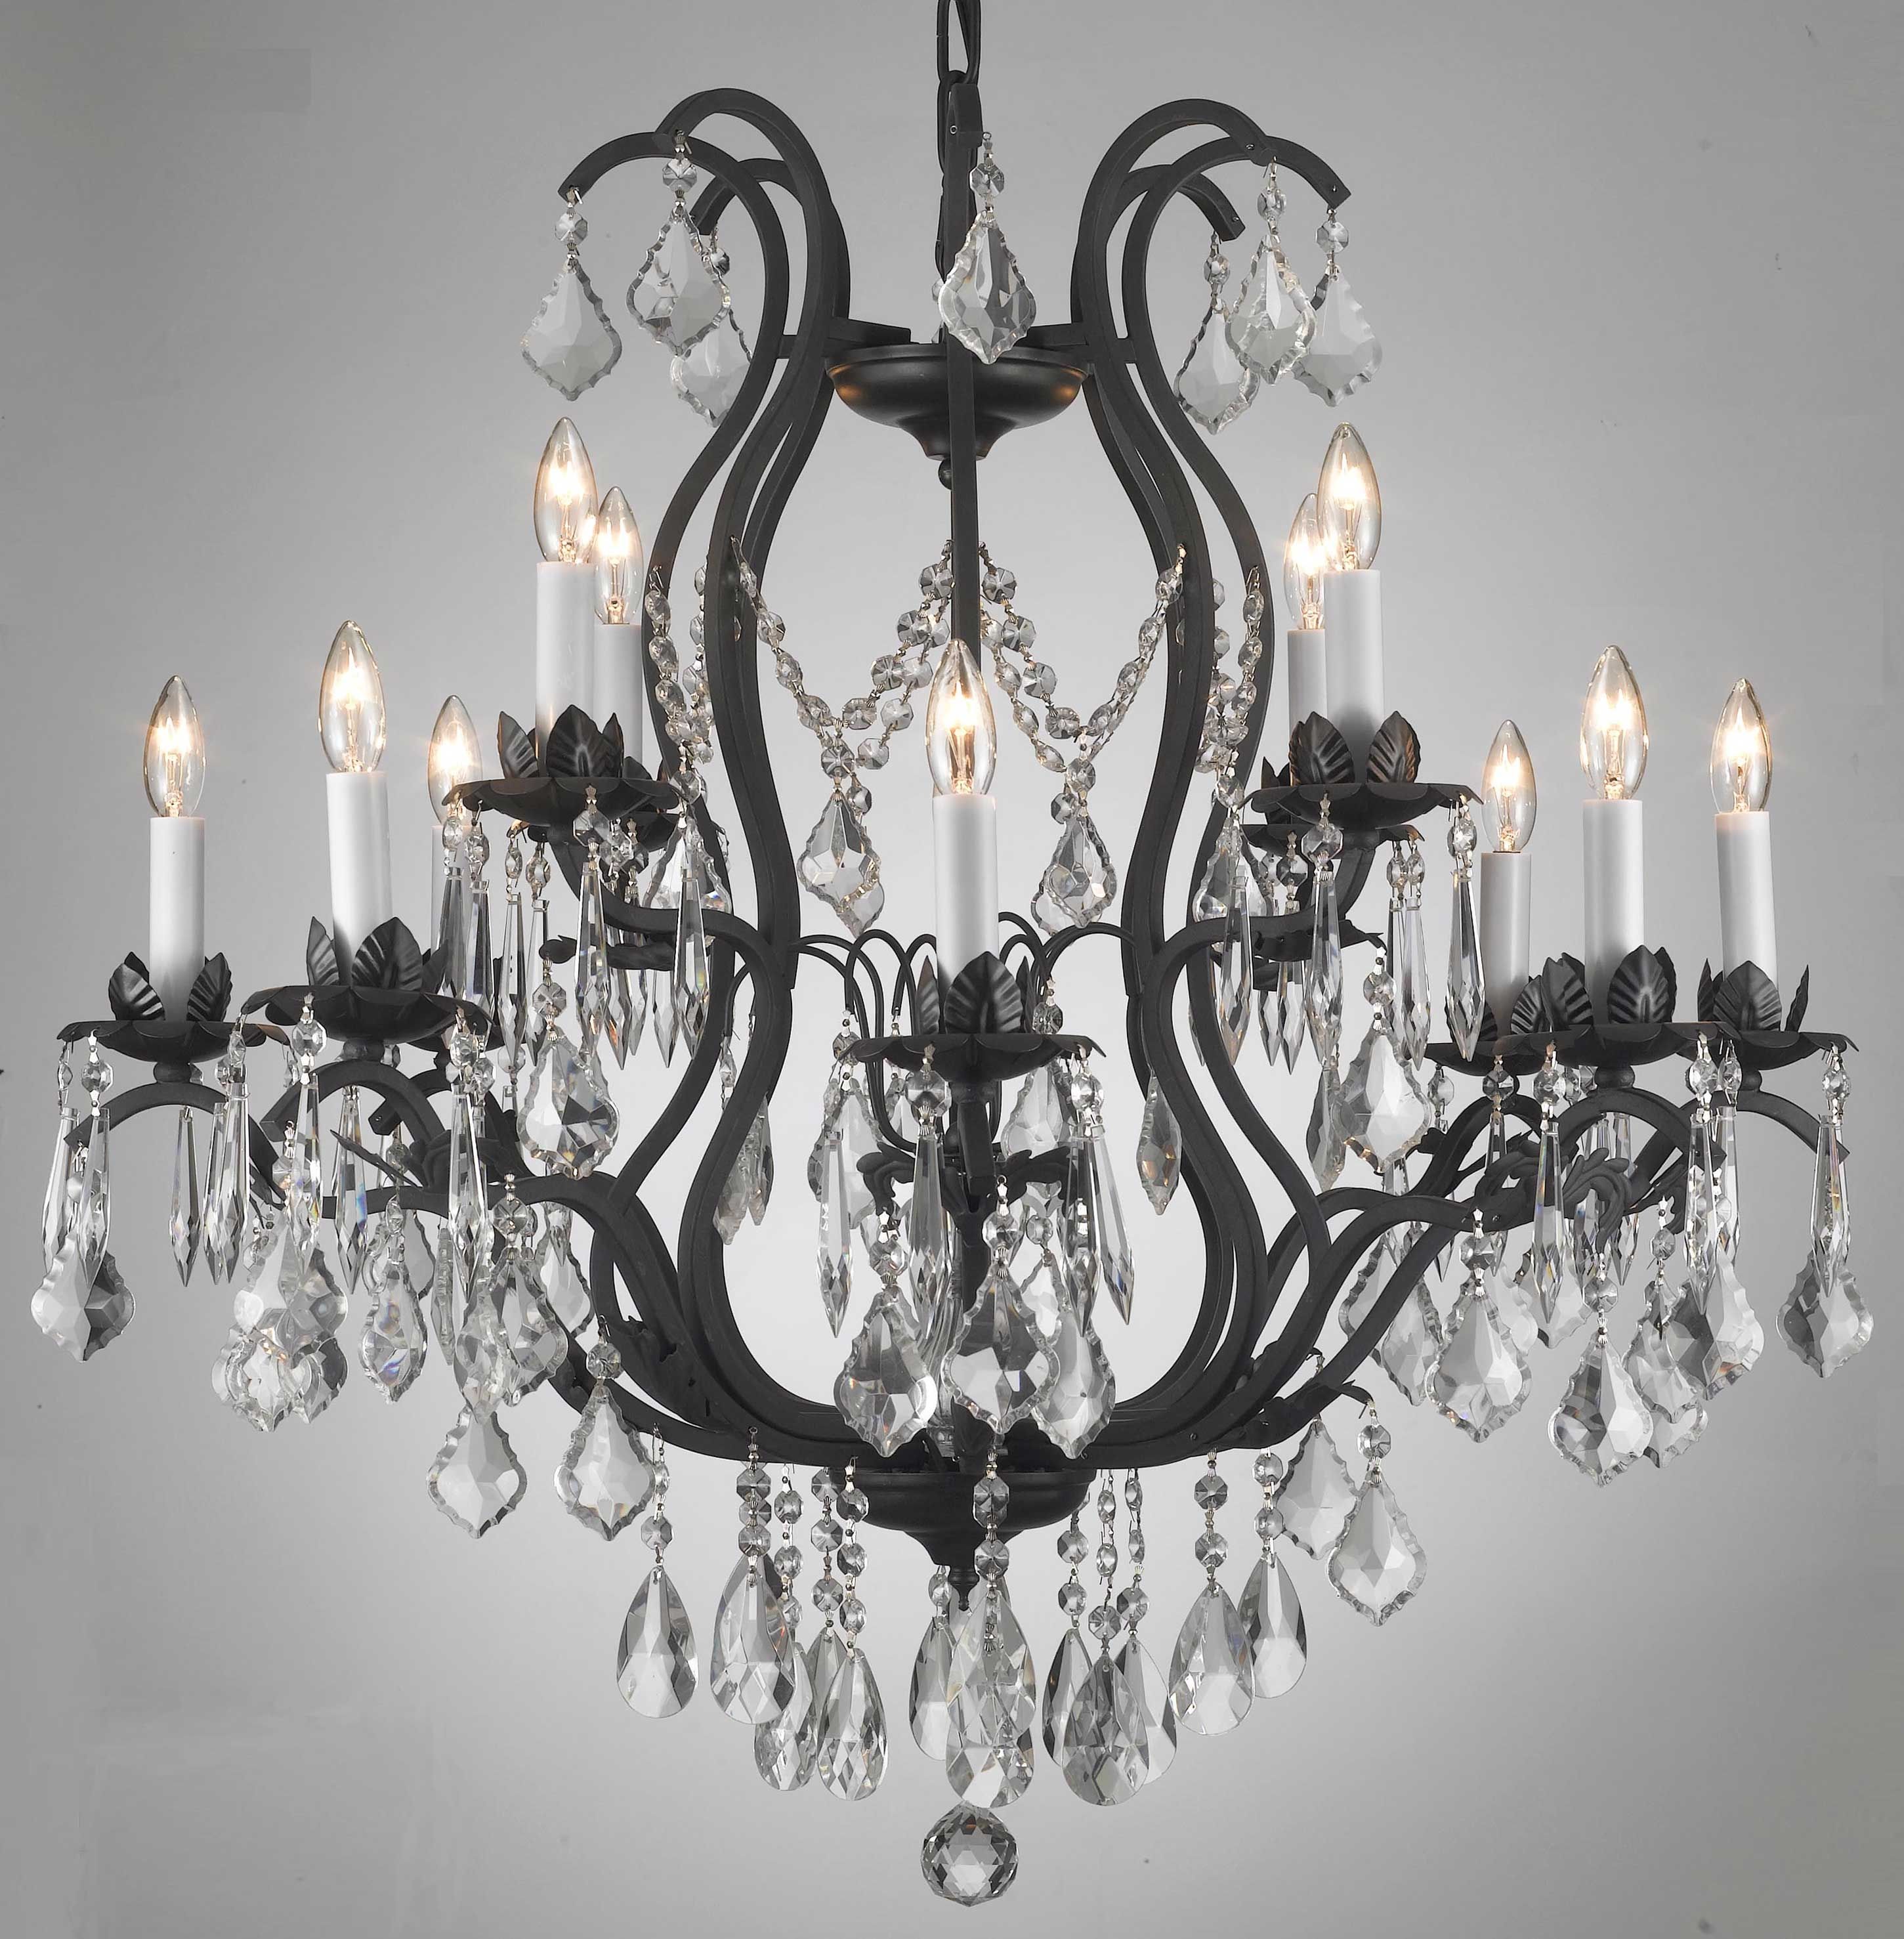 Chandelier Chandeliers Crystal Chandelier Crystal Chandeliers With Regard To Grey Crystal Chandelier (View 5 of 15)